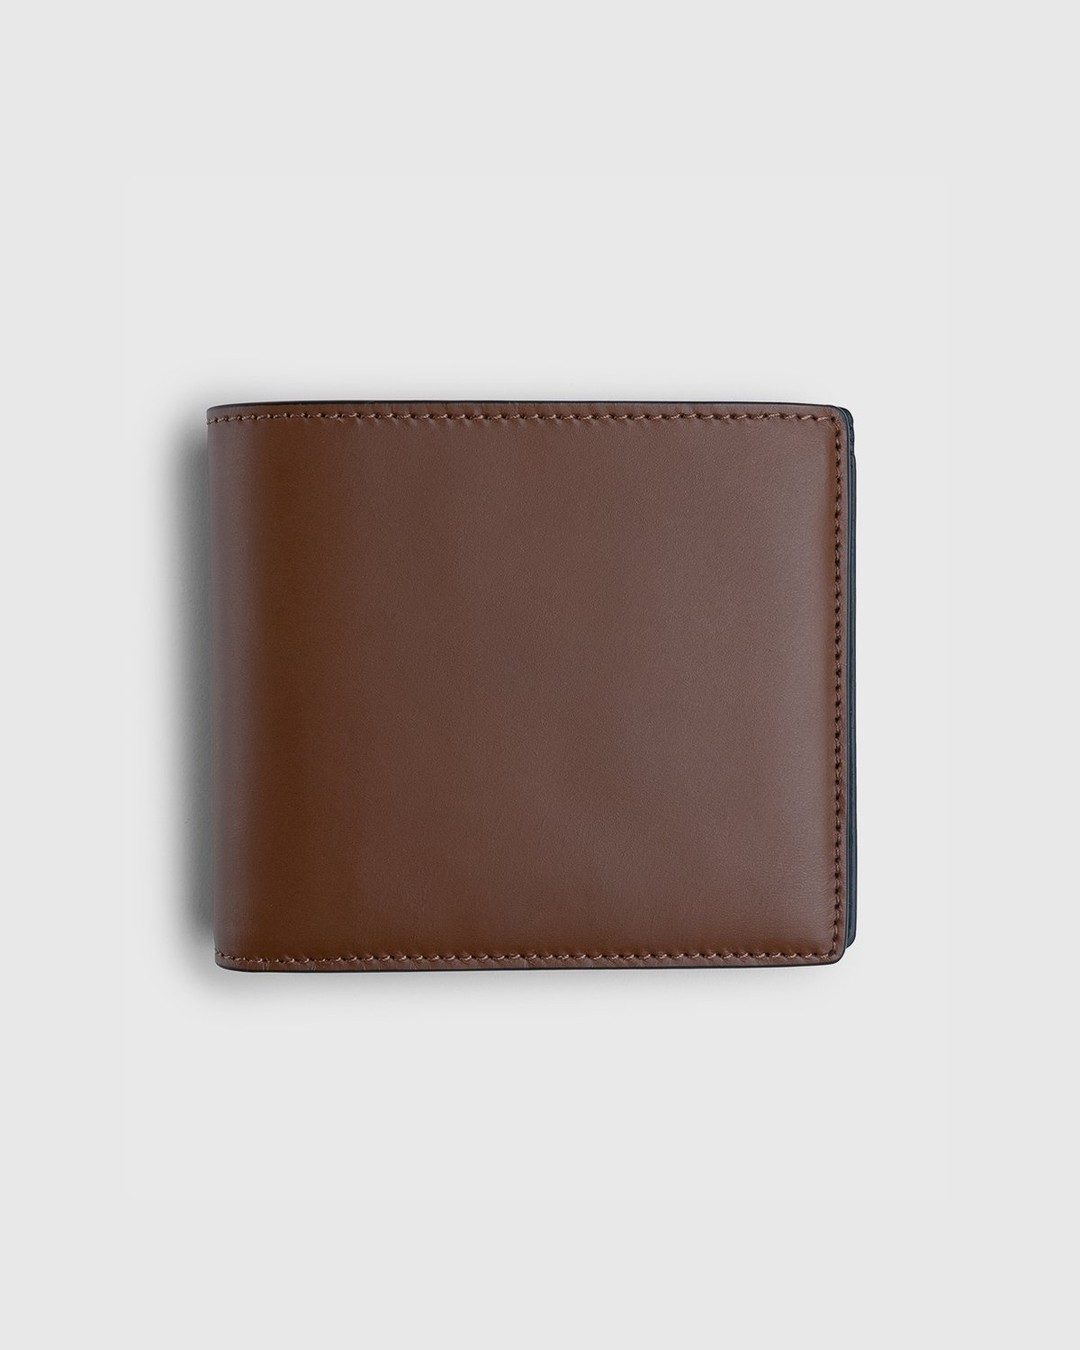 Maison Margiela – Leather Wallet Brown - Wallets - Brown - Image 2